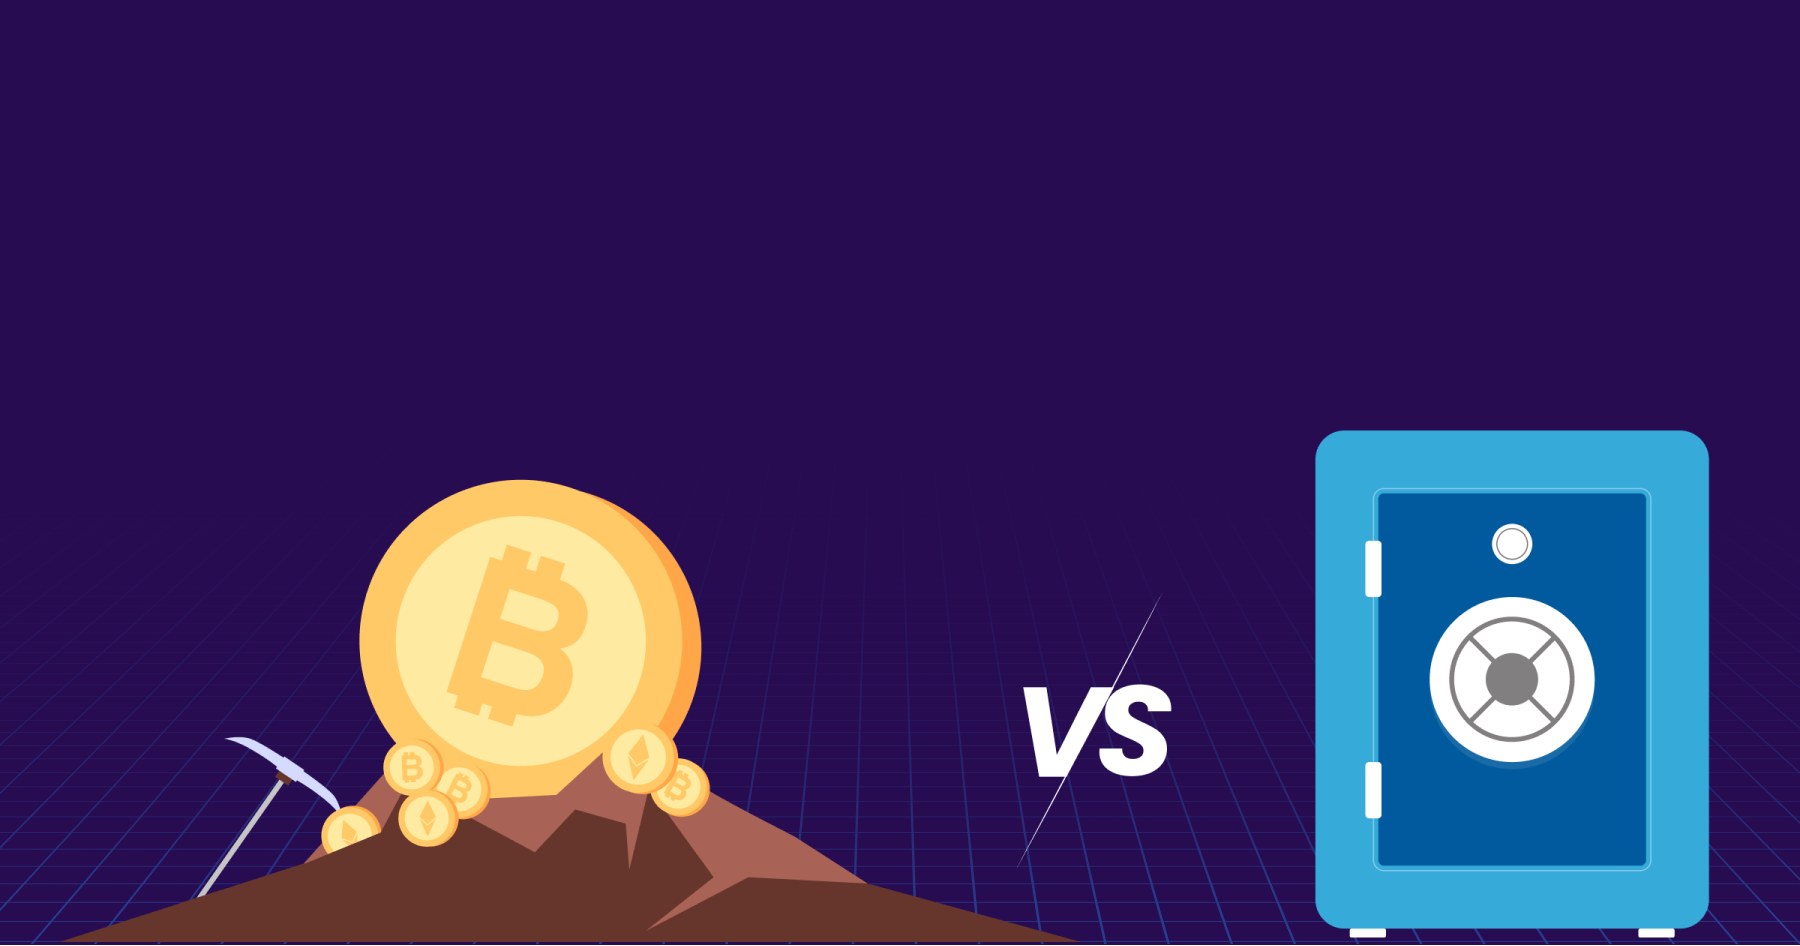 Proof-of-Work Vs Proof-of-Stake ( PoW vs PoS): Key Differences